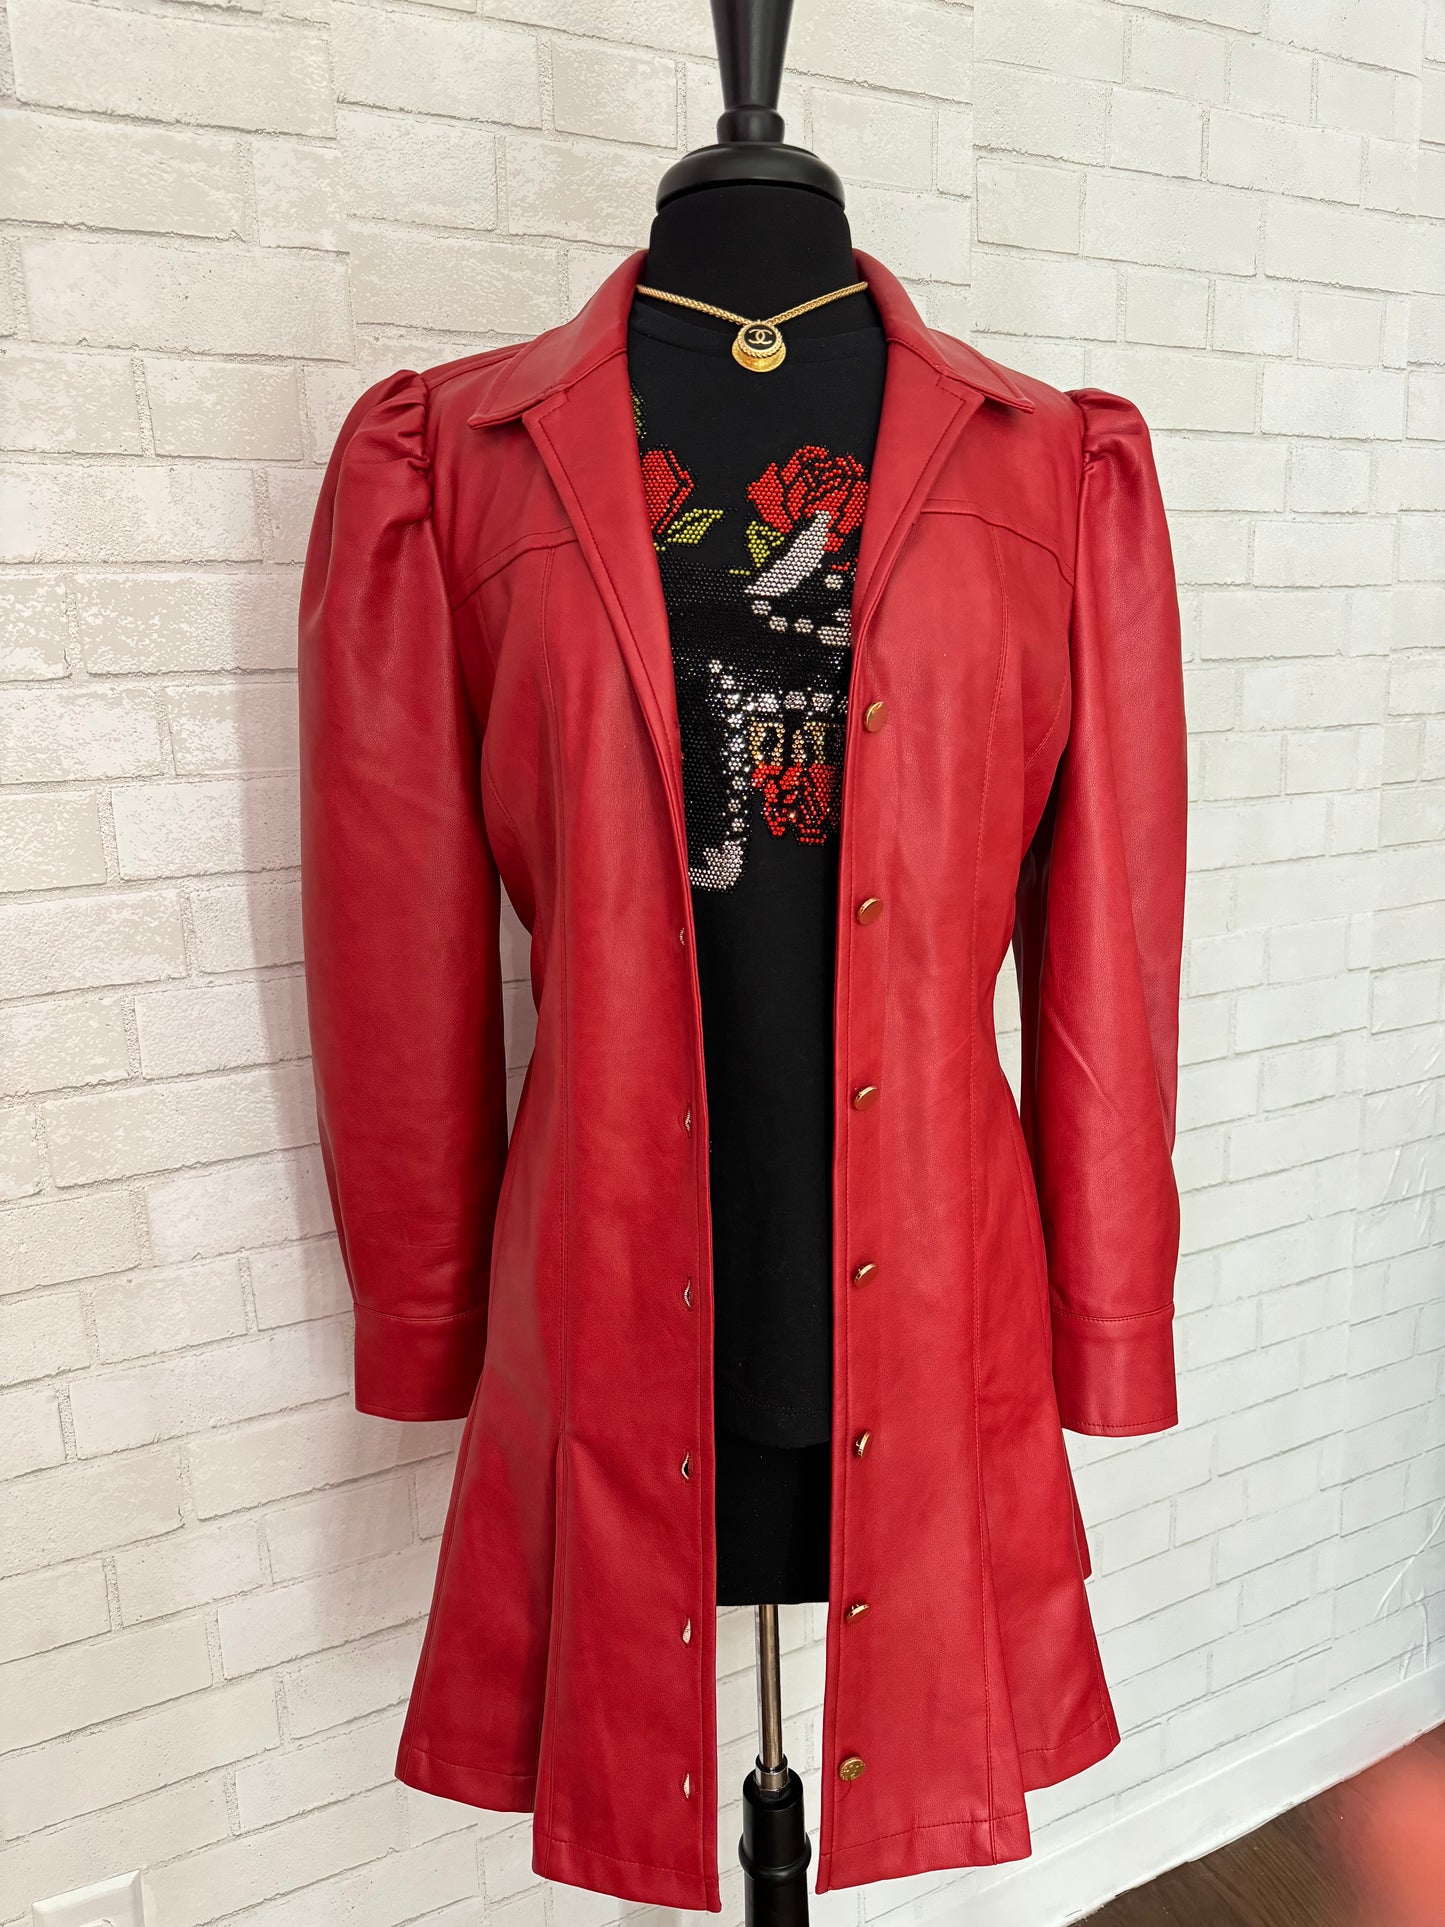 Faux Leather Belted Dress or Jacket